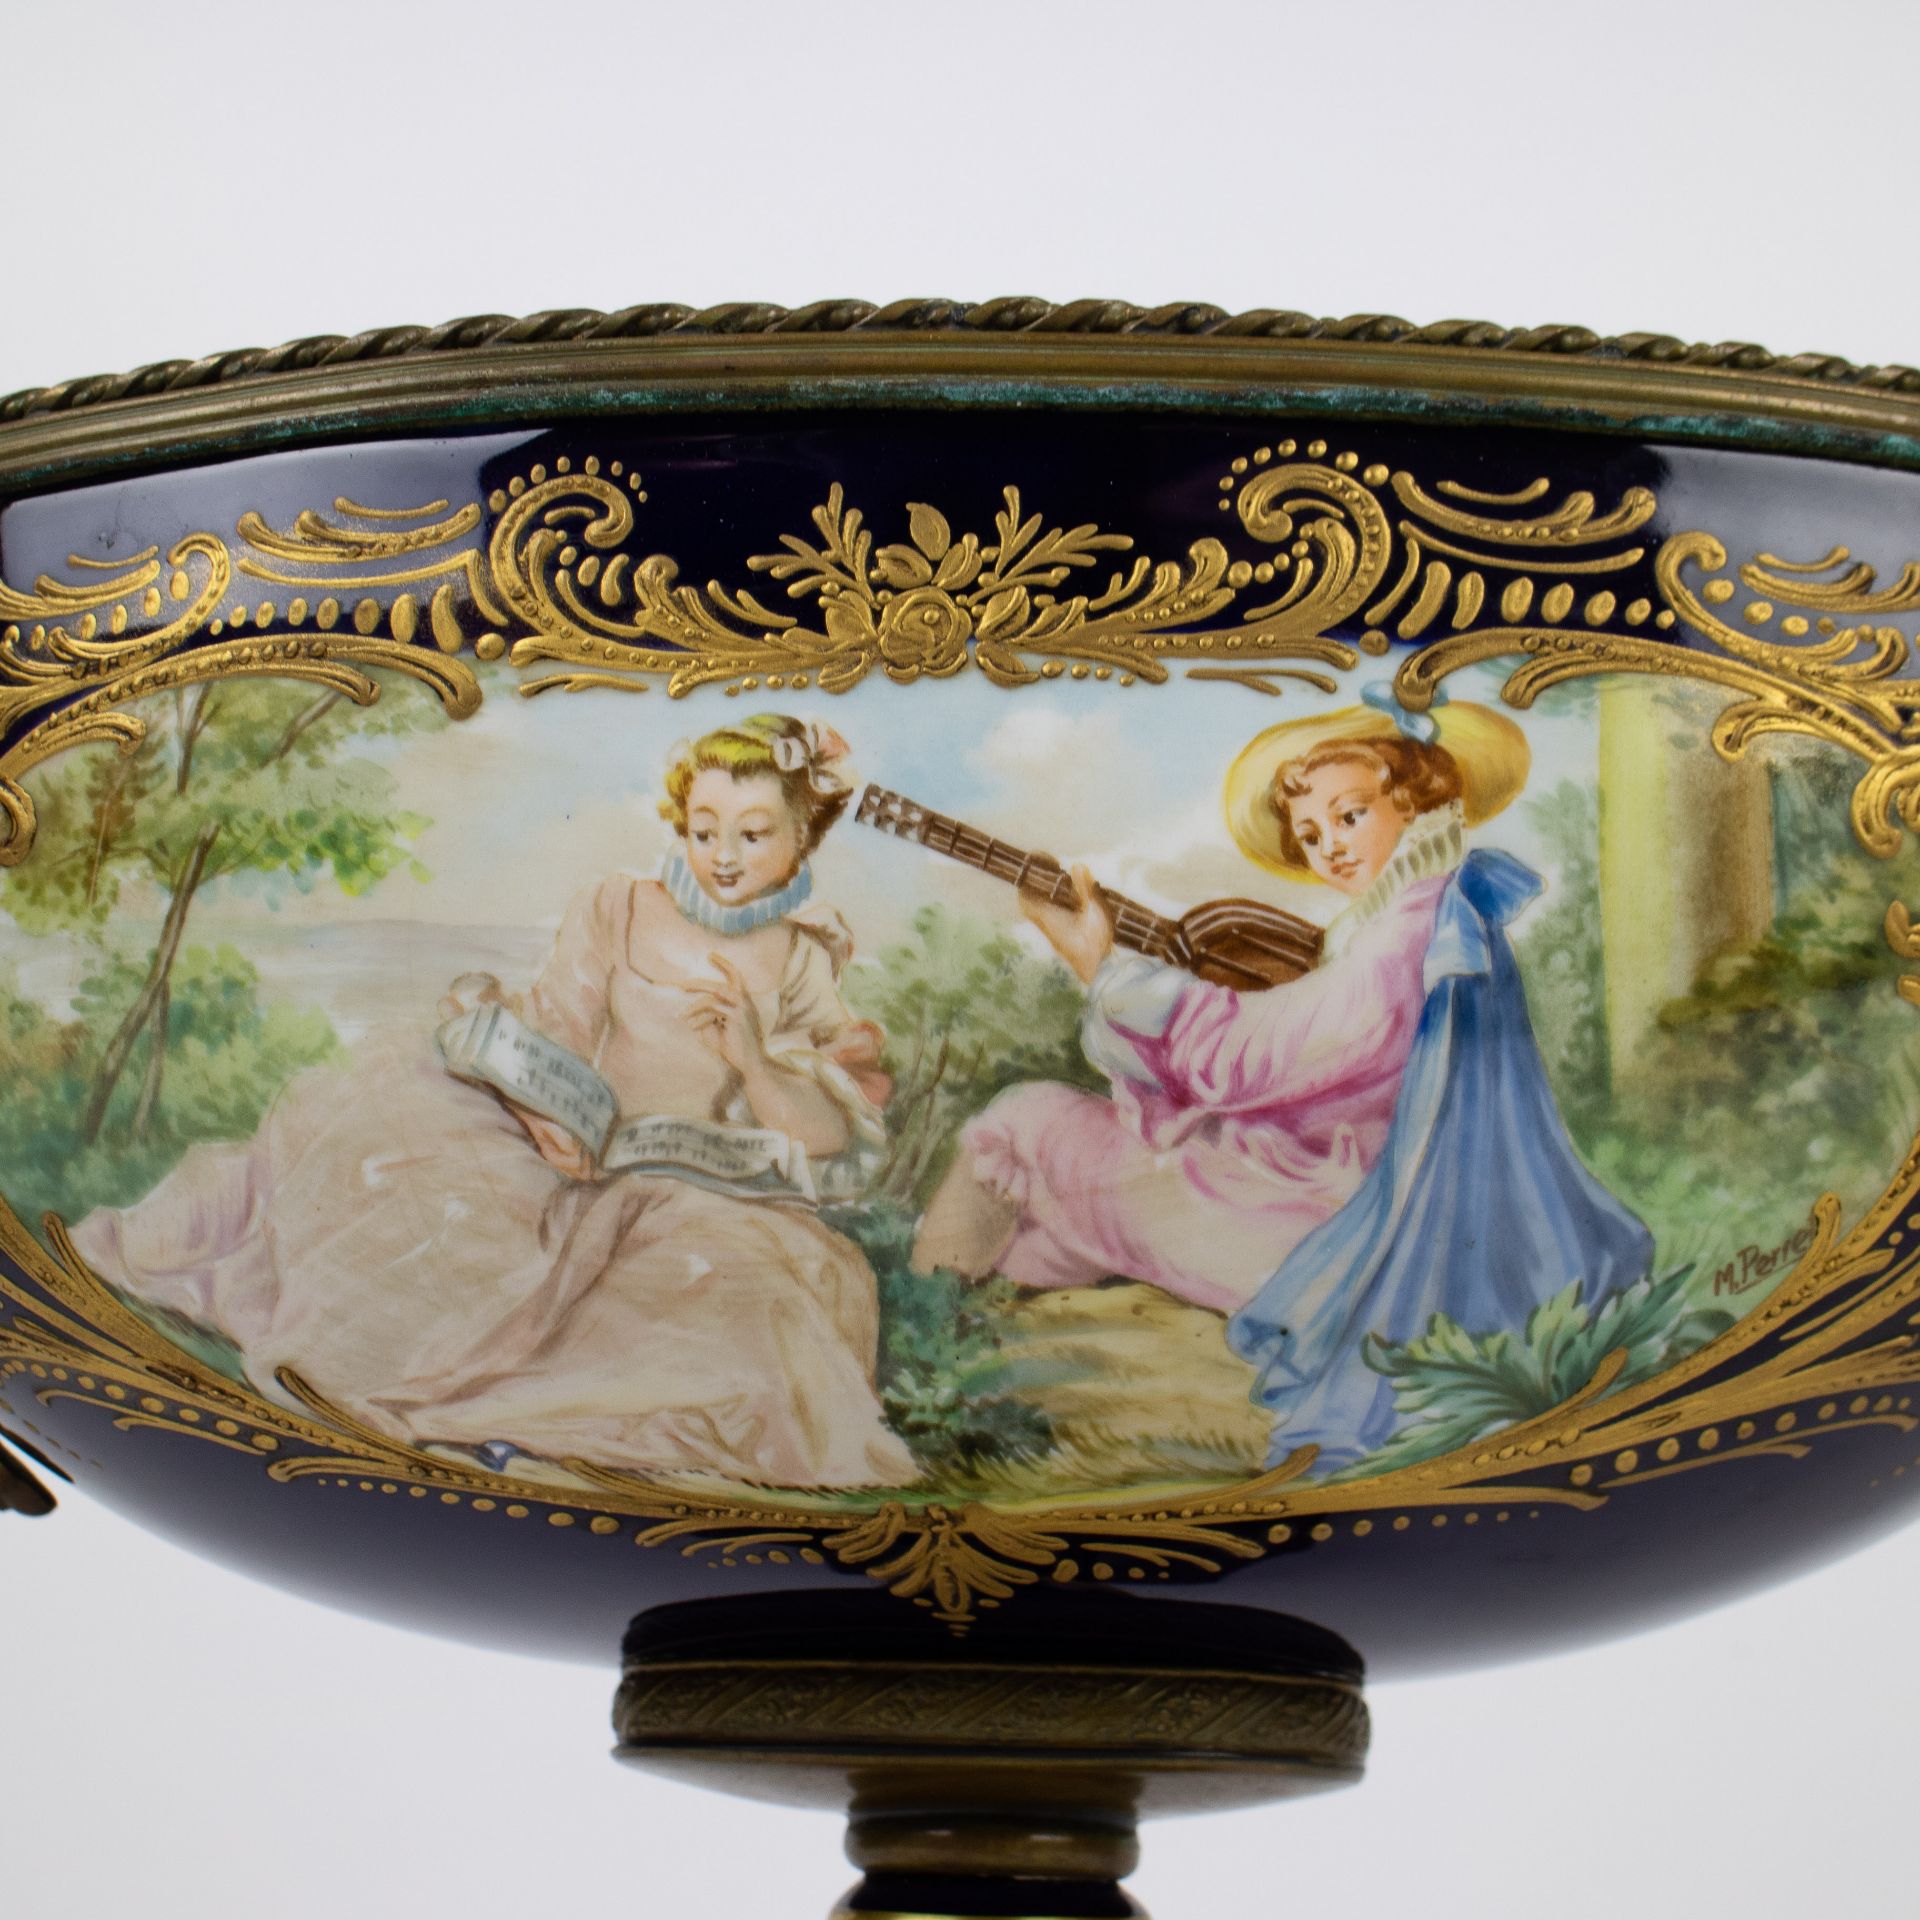 Sèvres handpainted garniture centre piece and a pair of covered vases - Image 3 of 16